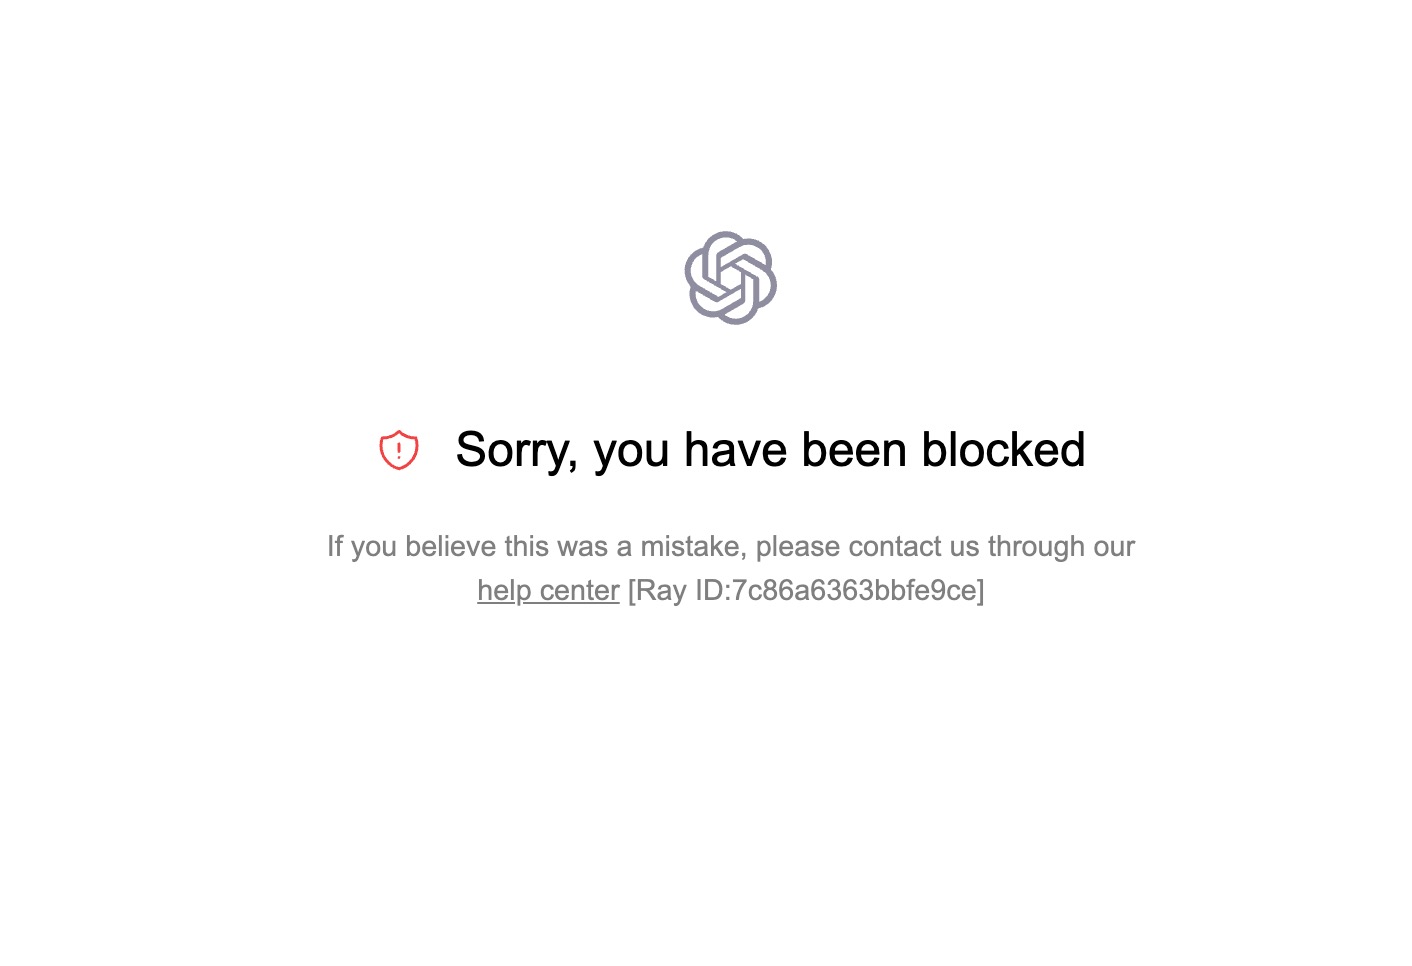 You have been blocked by ChatGPT